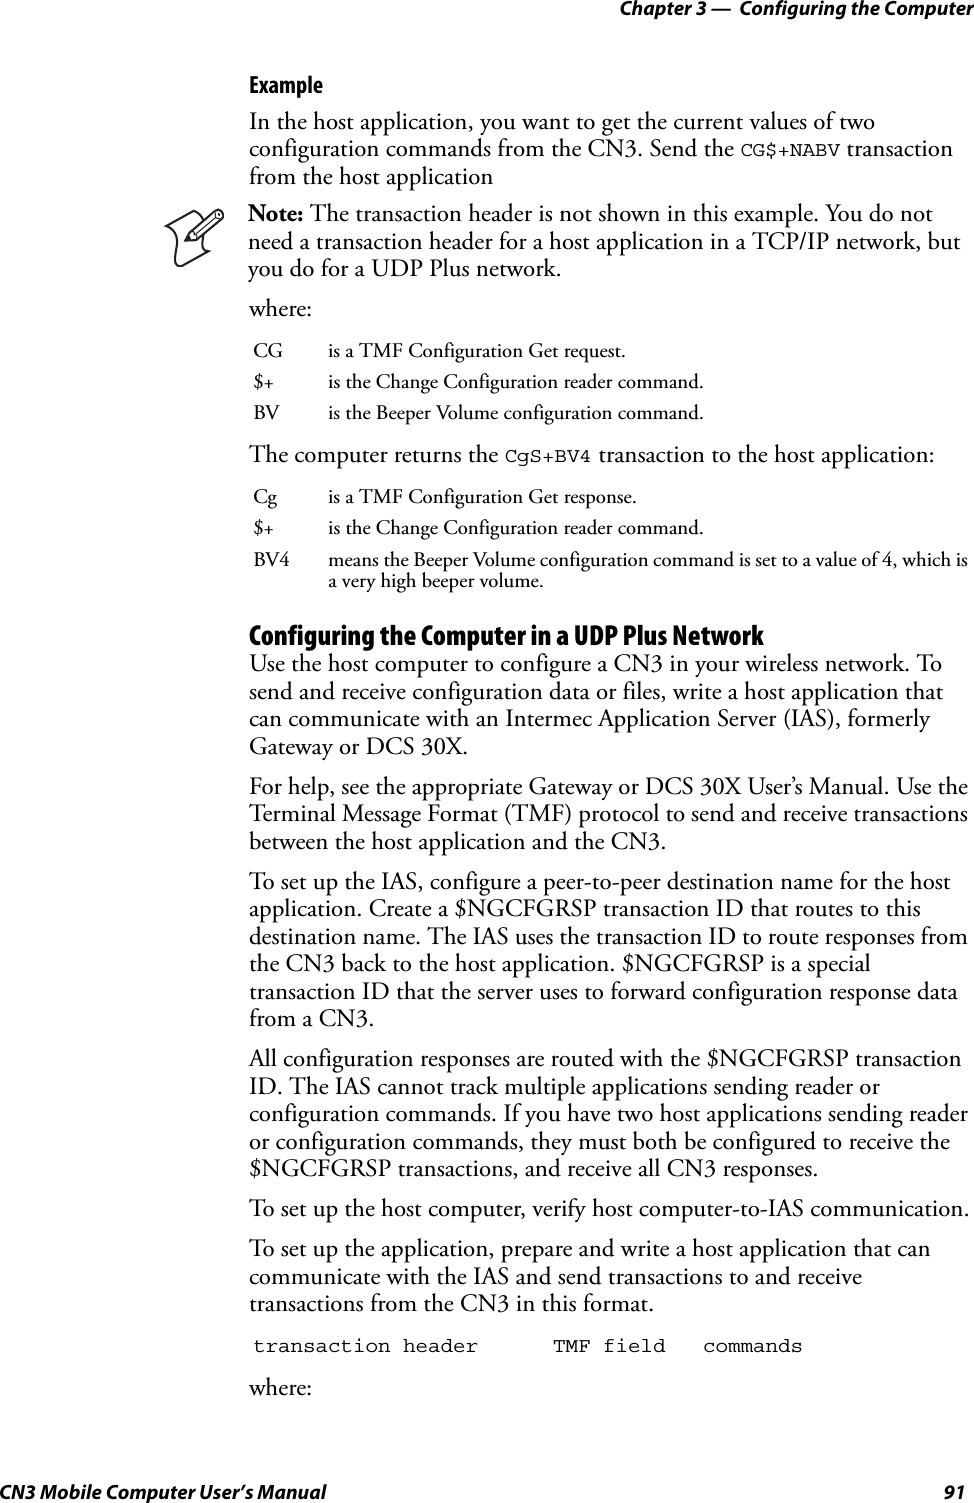 Chapter 3 —  Configuring the ComputerCN3 Mobile Computer User’s Manual 91ExampleIn the host application, you want to get the current values of two configuration commands from the CN3. Send the CG$+NABV transaction from the host applicationwhere:The computer returns the CgS+BV4 transaction to the host application:Configuring the Computer in a UDP Plus NetworkUse the host computer to configure a CN3 in your wireless network. To send and receive configuration data or files, write a host application that can communicate with an Intermec Application Server (IAS), formerly Gateway or DCS 30X.For help, see the appropriate Gateway or DCS 30X User’s Manual. Use the Terminal Message Format (TMF) protocol to send and receive transactions between the host application and the CN3.To set up the IAS, configure a peer-to-peer destination name for the host application. Create a $NGCFGRSP transaction ID that routes to this destination name. The IAS uses the transaction ID to route responses from the CN3 back to the host application. $NGCFGRSP is a special transaction ID that the server uses to forward configuration response data from a CN3.All configuration responses are routed with the $NGCFGRSP transaction ID. The IAS cannot track multiple applications sending reader or configuration commands. If you have two host applications sending reader or configuration commands, they must both be configured to receive the $NGCFGRSP transactions, and receive all CN3 responses. To set up the host computer, verify host computer-to-IAS communication.To set up the application, prepare and write a host application that can communicate with the IAS and send transactions to and receive transactions from the CN3 in this format.where:Note: The transaction header is not shown in this example. You do not need a transaction header for a host application in a TCP/IP network, but you do for a UDP Plus network.CG is a TMF Configuration Get request.$+ is the Change Configuration reader command.BV is the Beeper Volume configuration command.Cg is a TMF Configuration Get response.$+ is the Change Configuration reader command.BV4 means the Beeper Volume configuration command is set to a value of 4, which is a very high beeper volume.transaction header TMF field commands